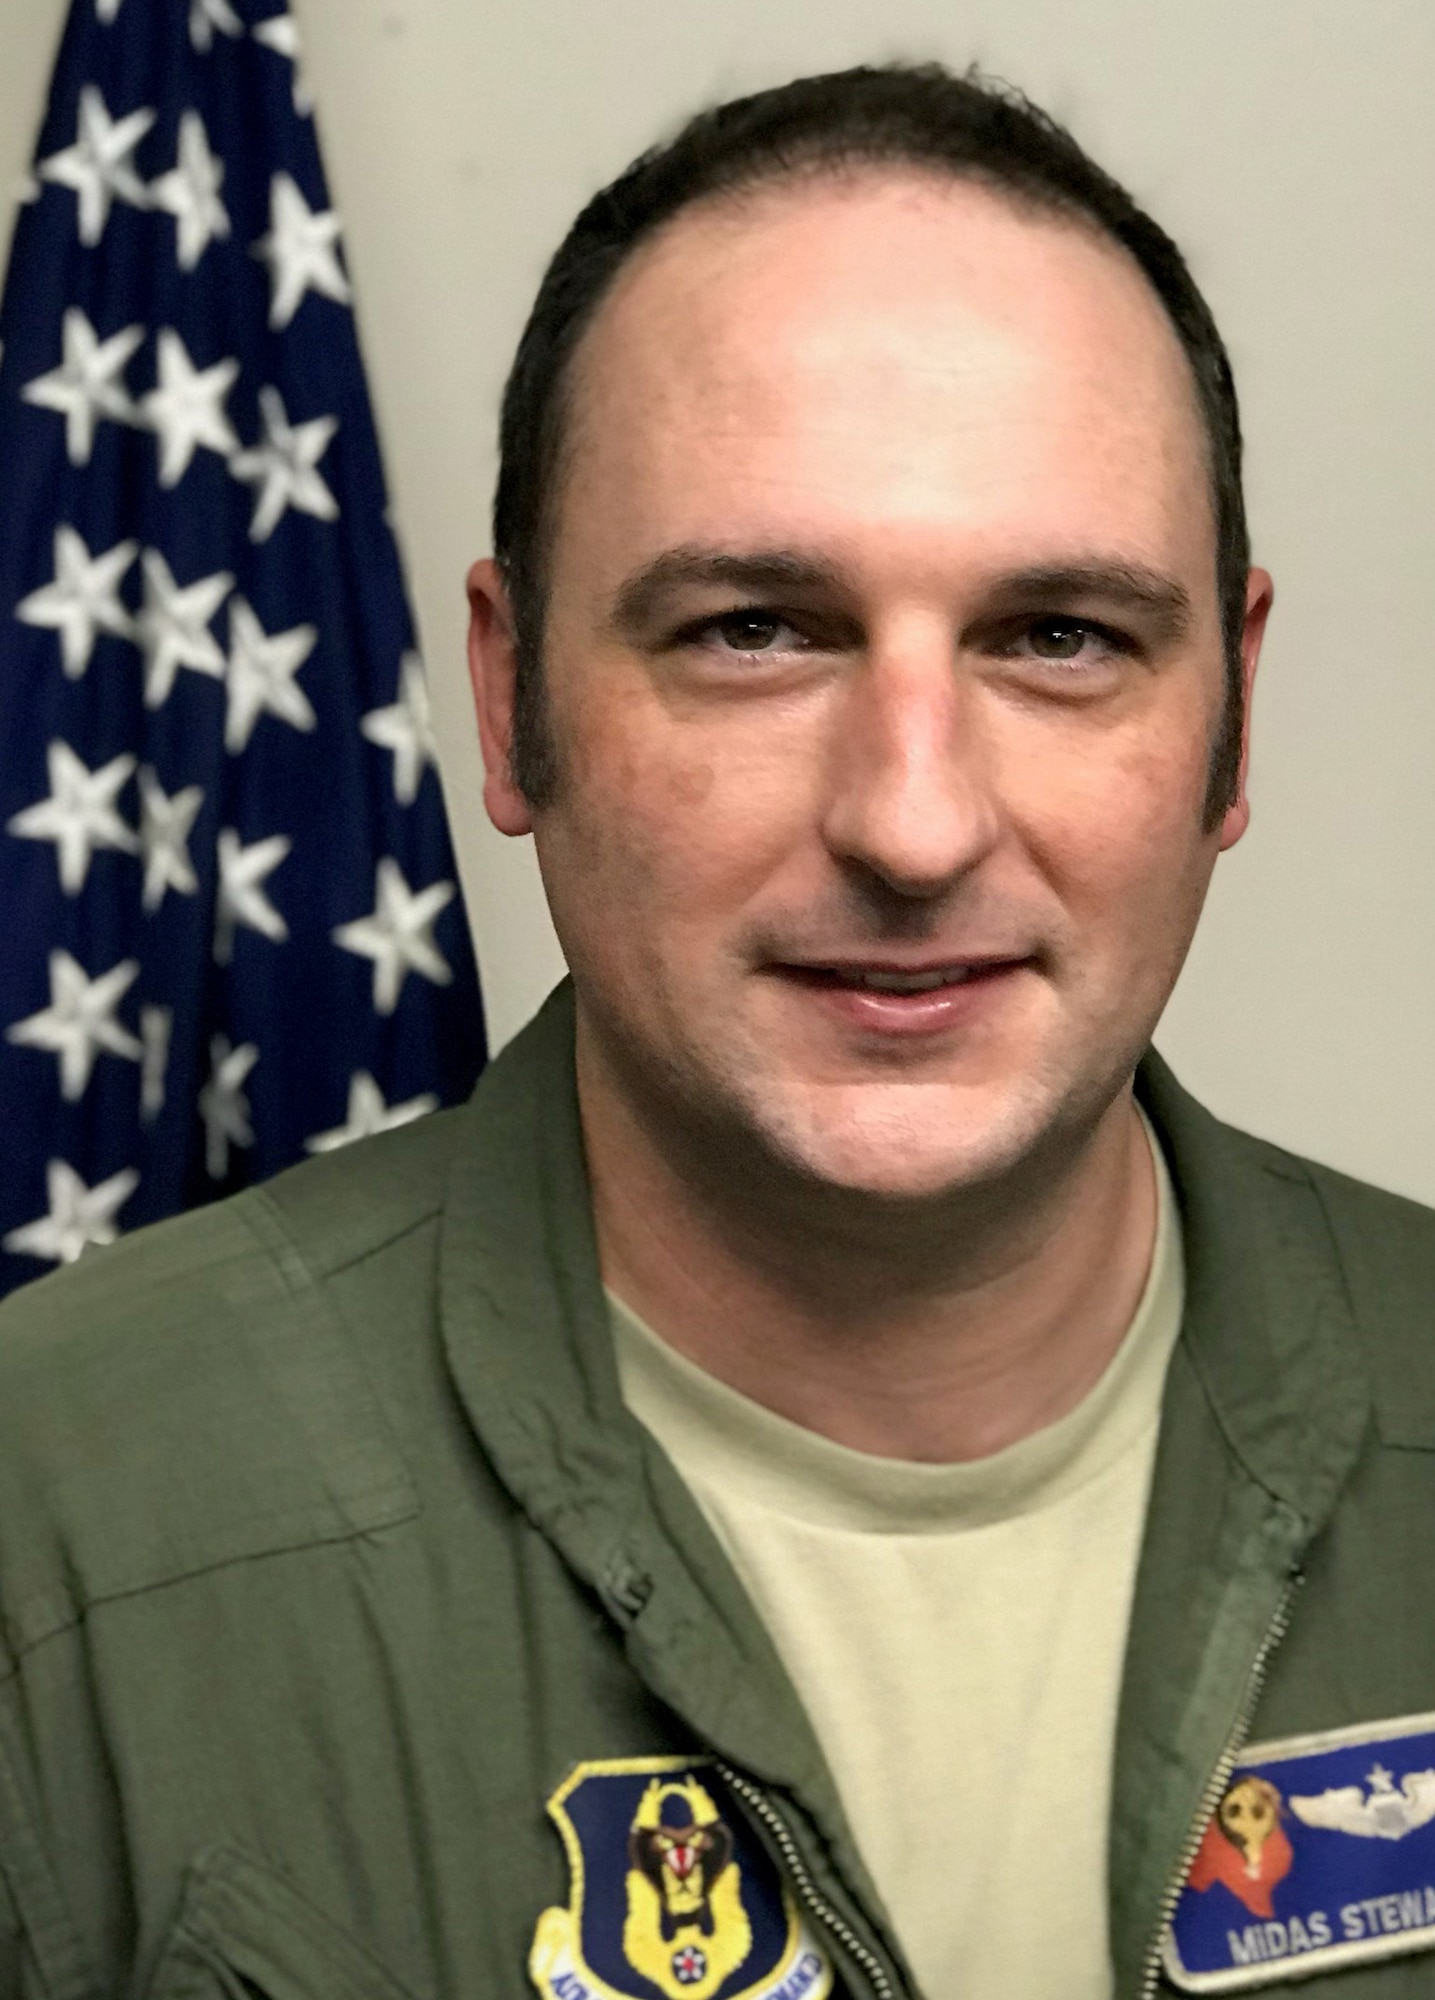 Reserve instructor pilot earns AETC safety award > Nellis Air Force